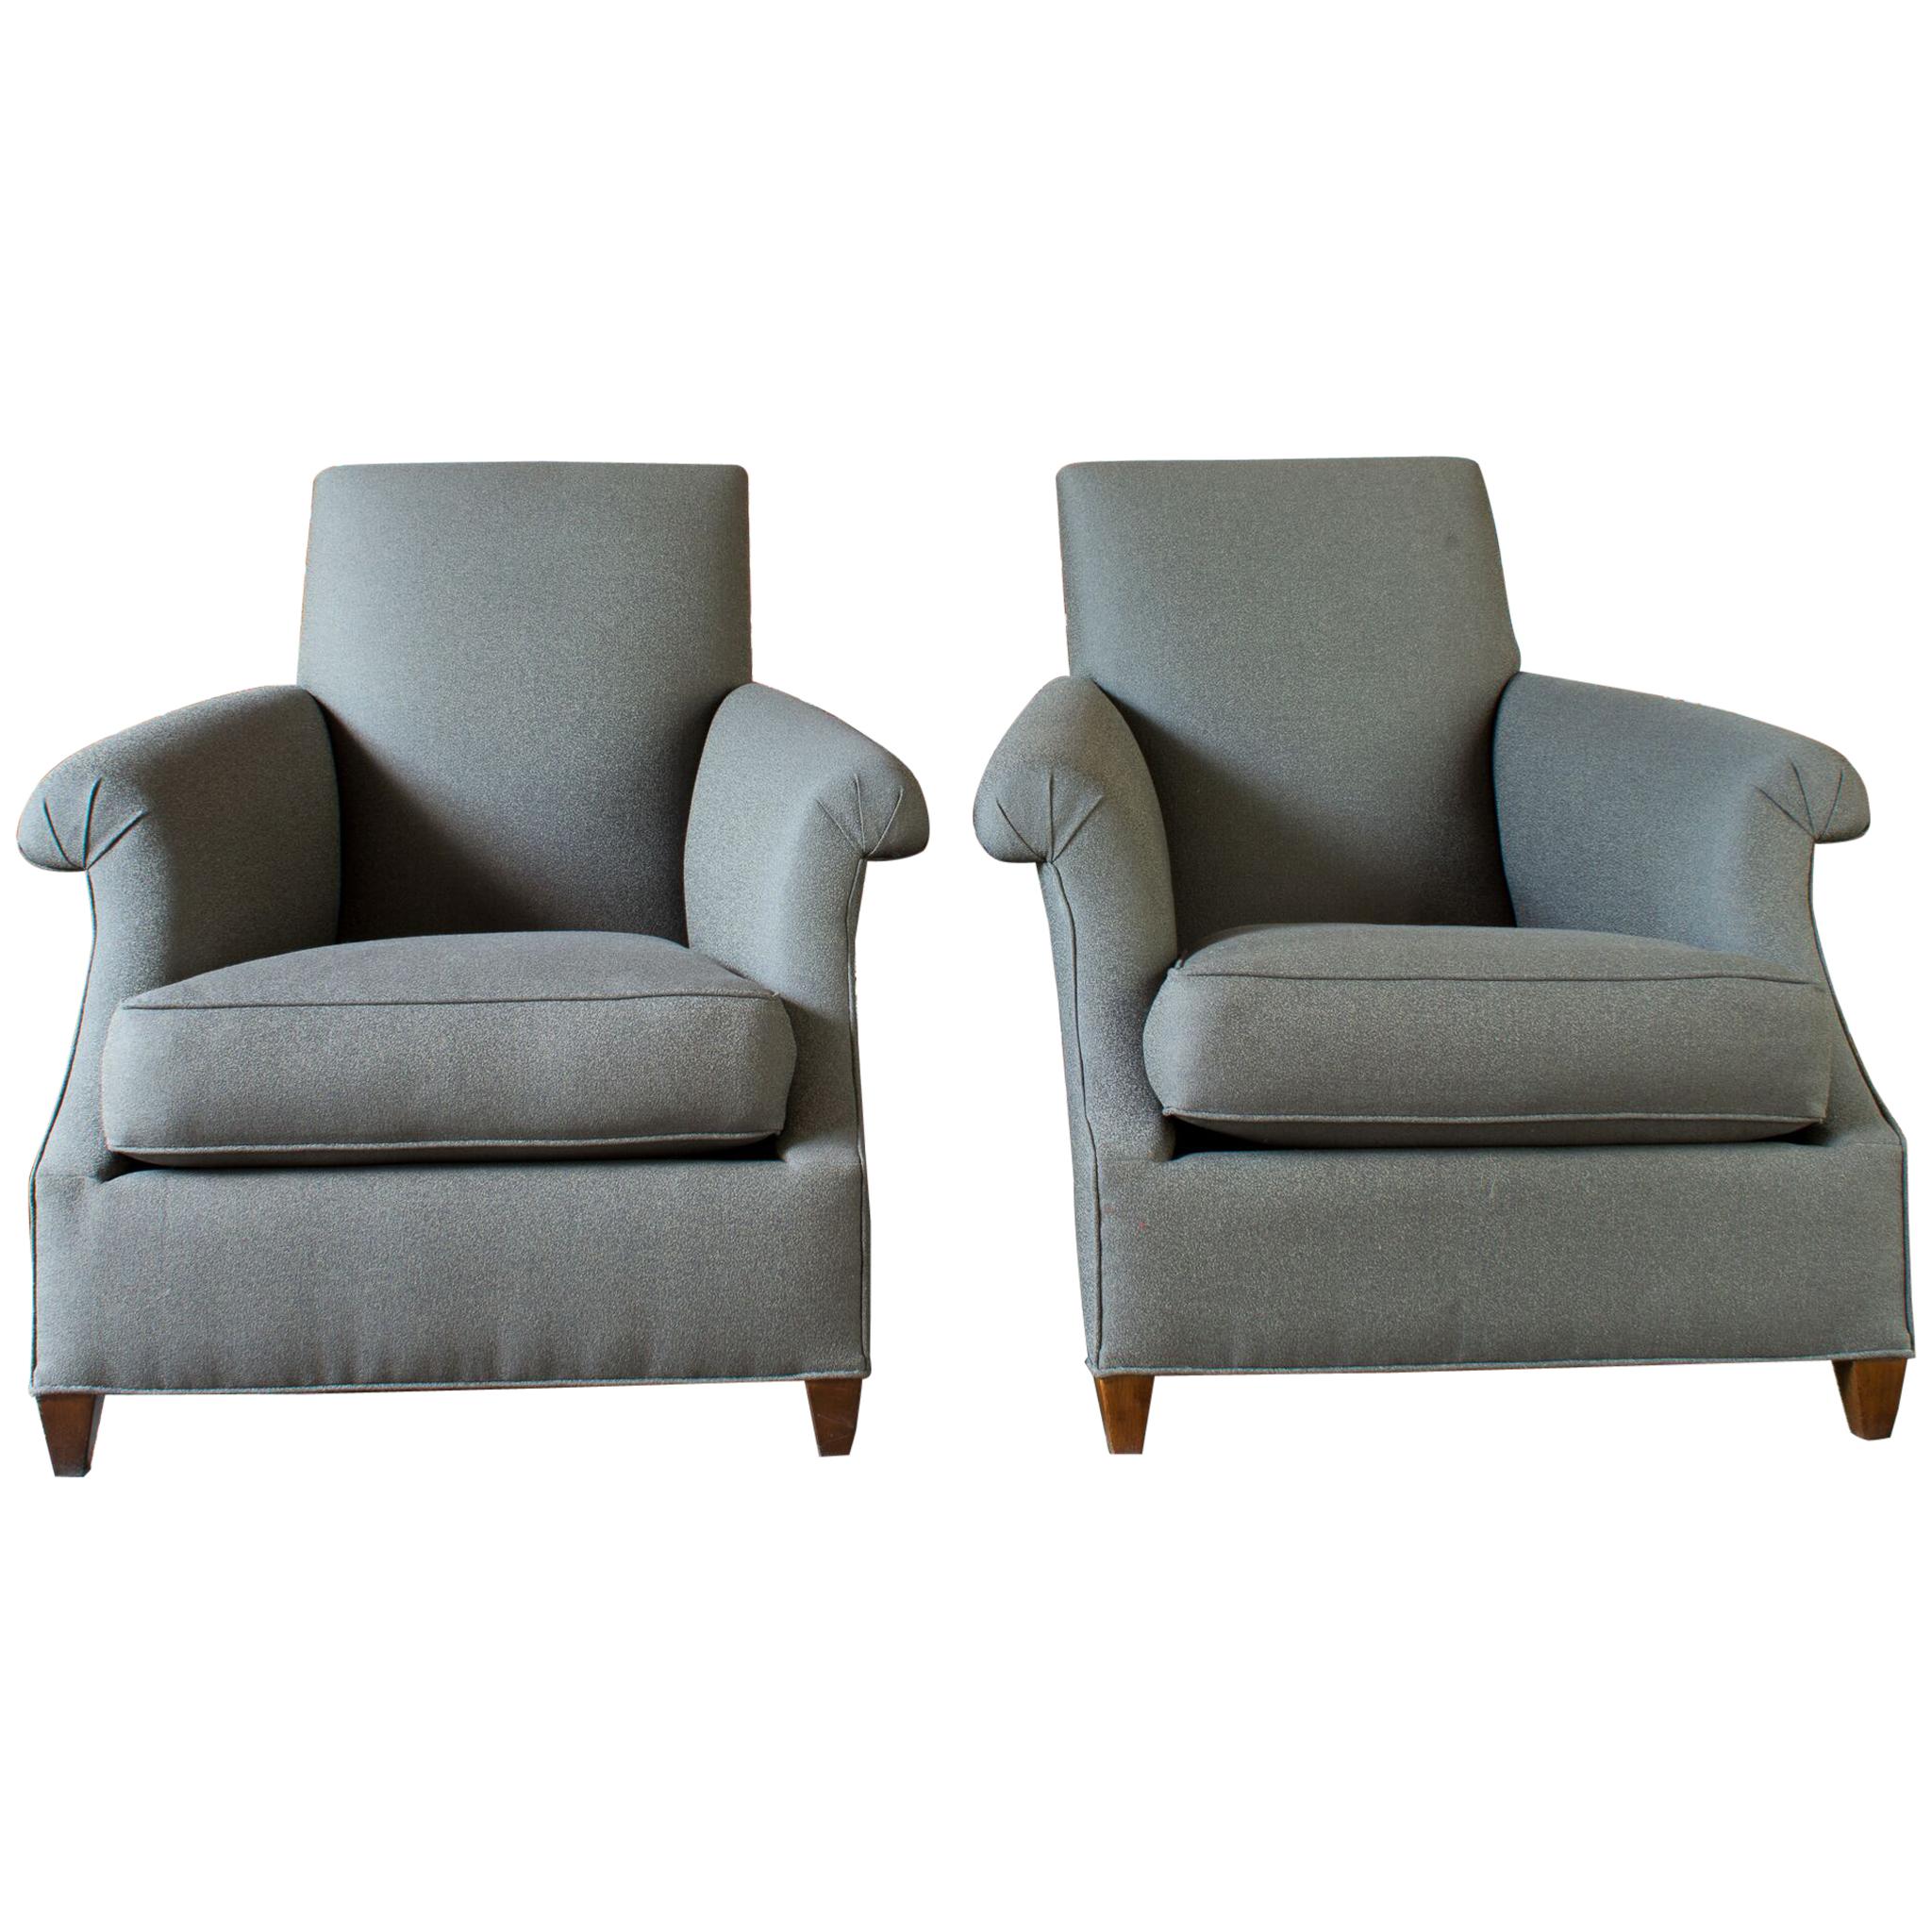 Donghia Haute Chairs For Sale